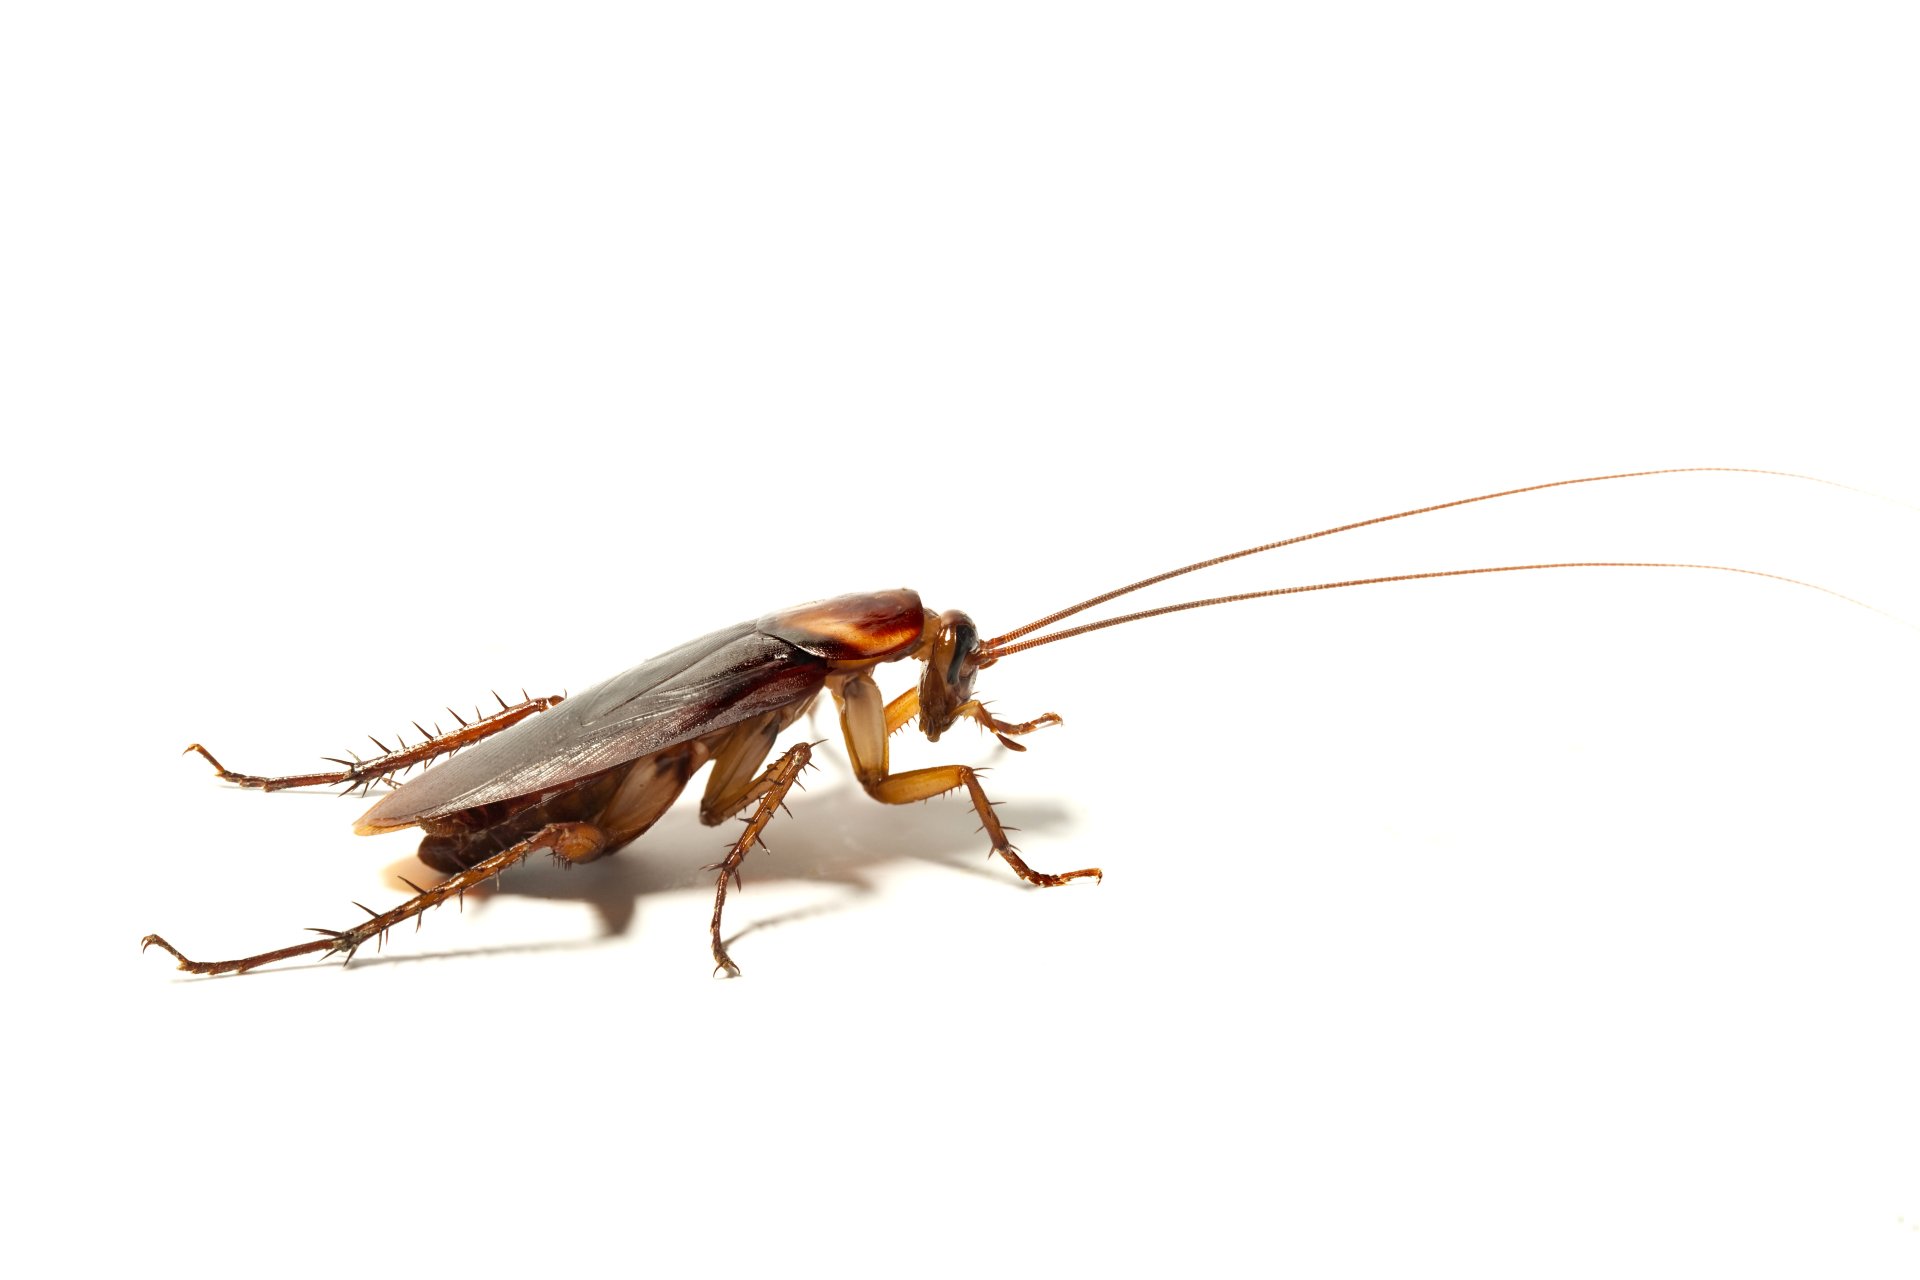 Cockroach Insect Isolated On White Background Stock Footage Video 100  Royaltyfree 10332932  Shutterstock